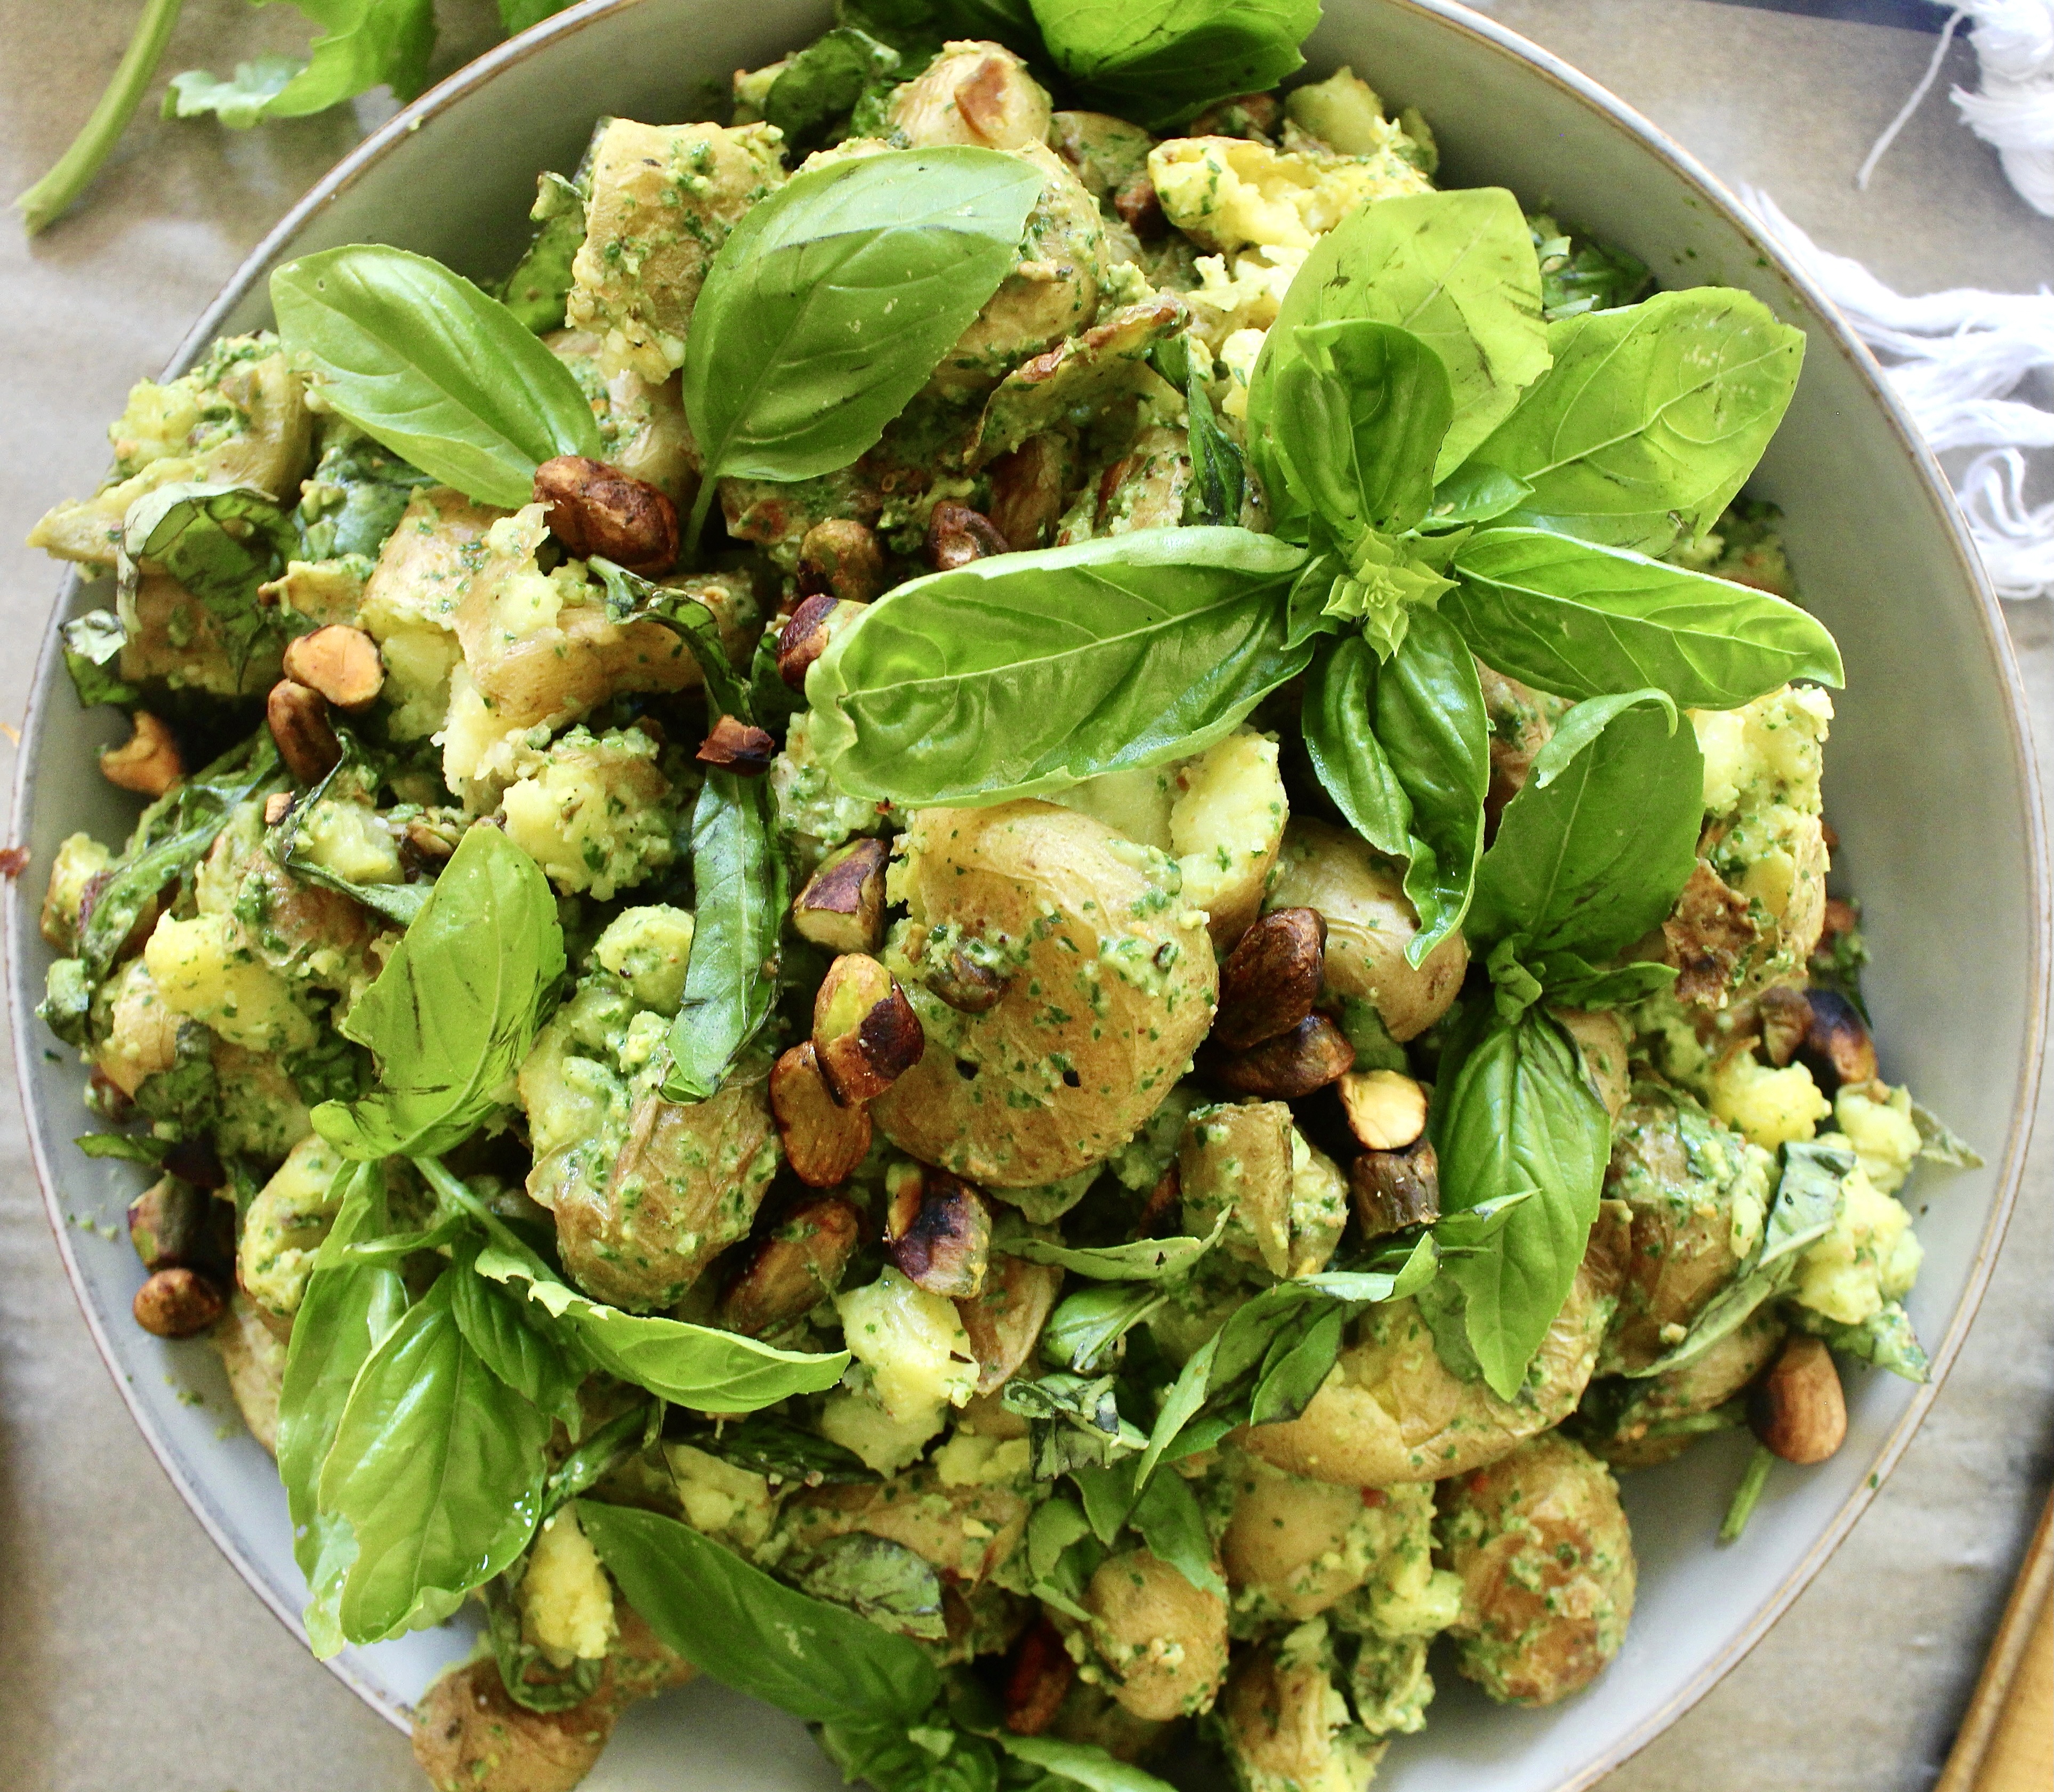 Crispy smashed baby potatoes tossed in a simple arugula pesto: This Smashed Pistachio Pesto di Rucola Potato Salad is the best summer mayo-free potato salad!